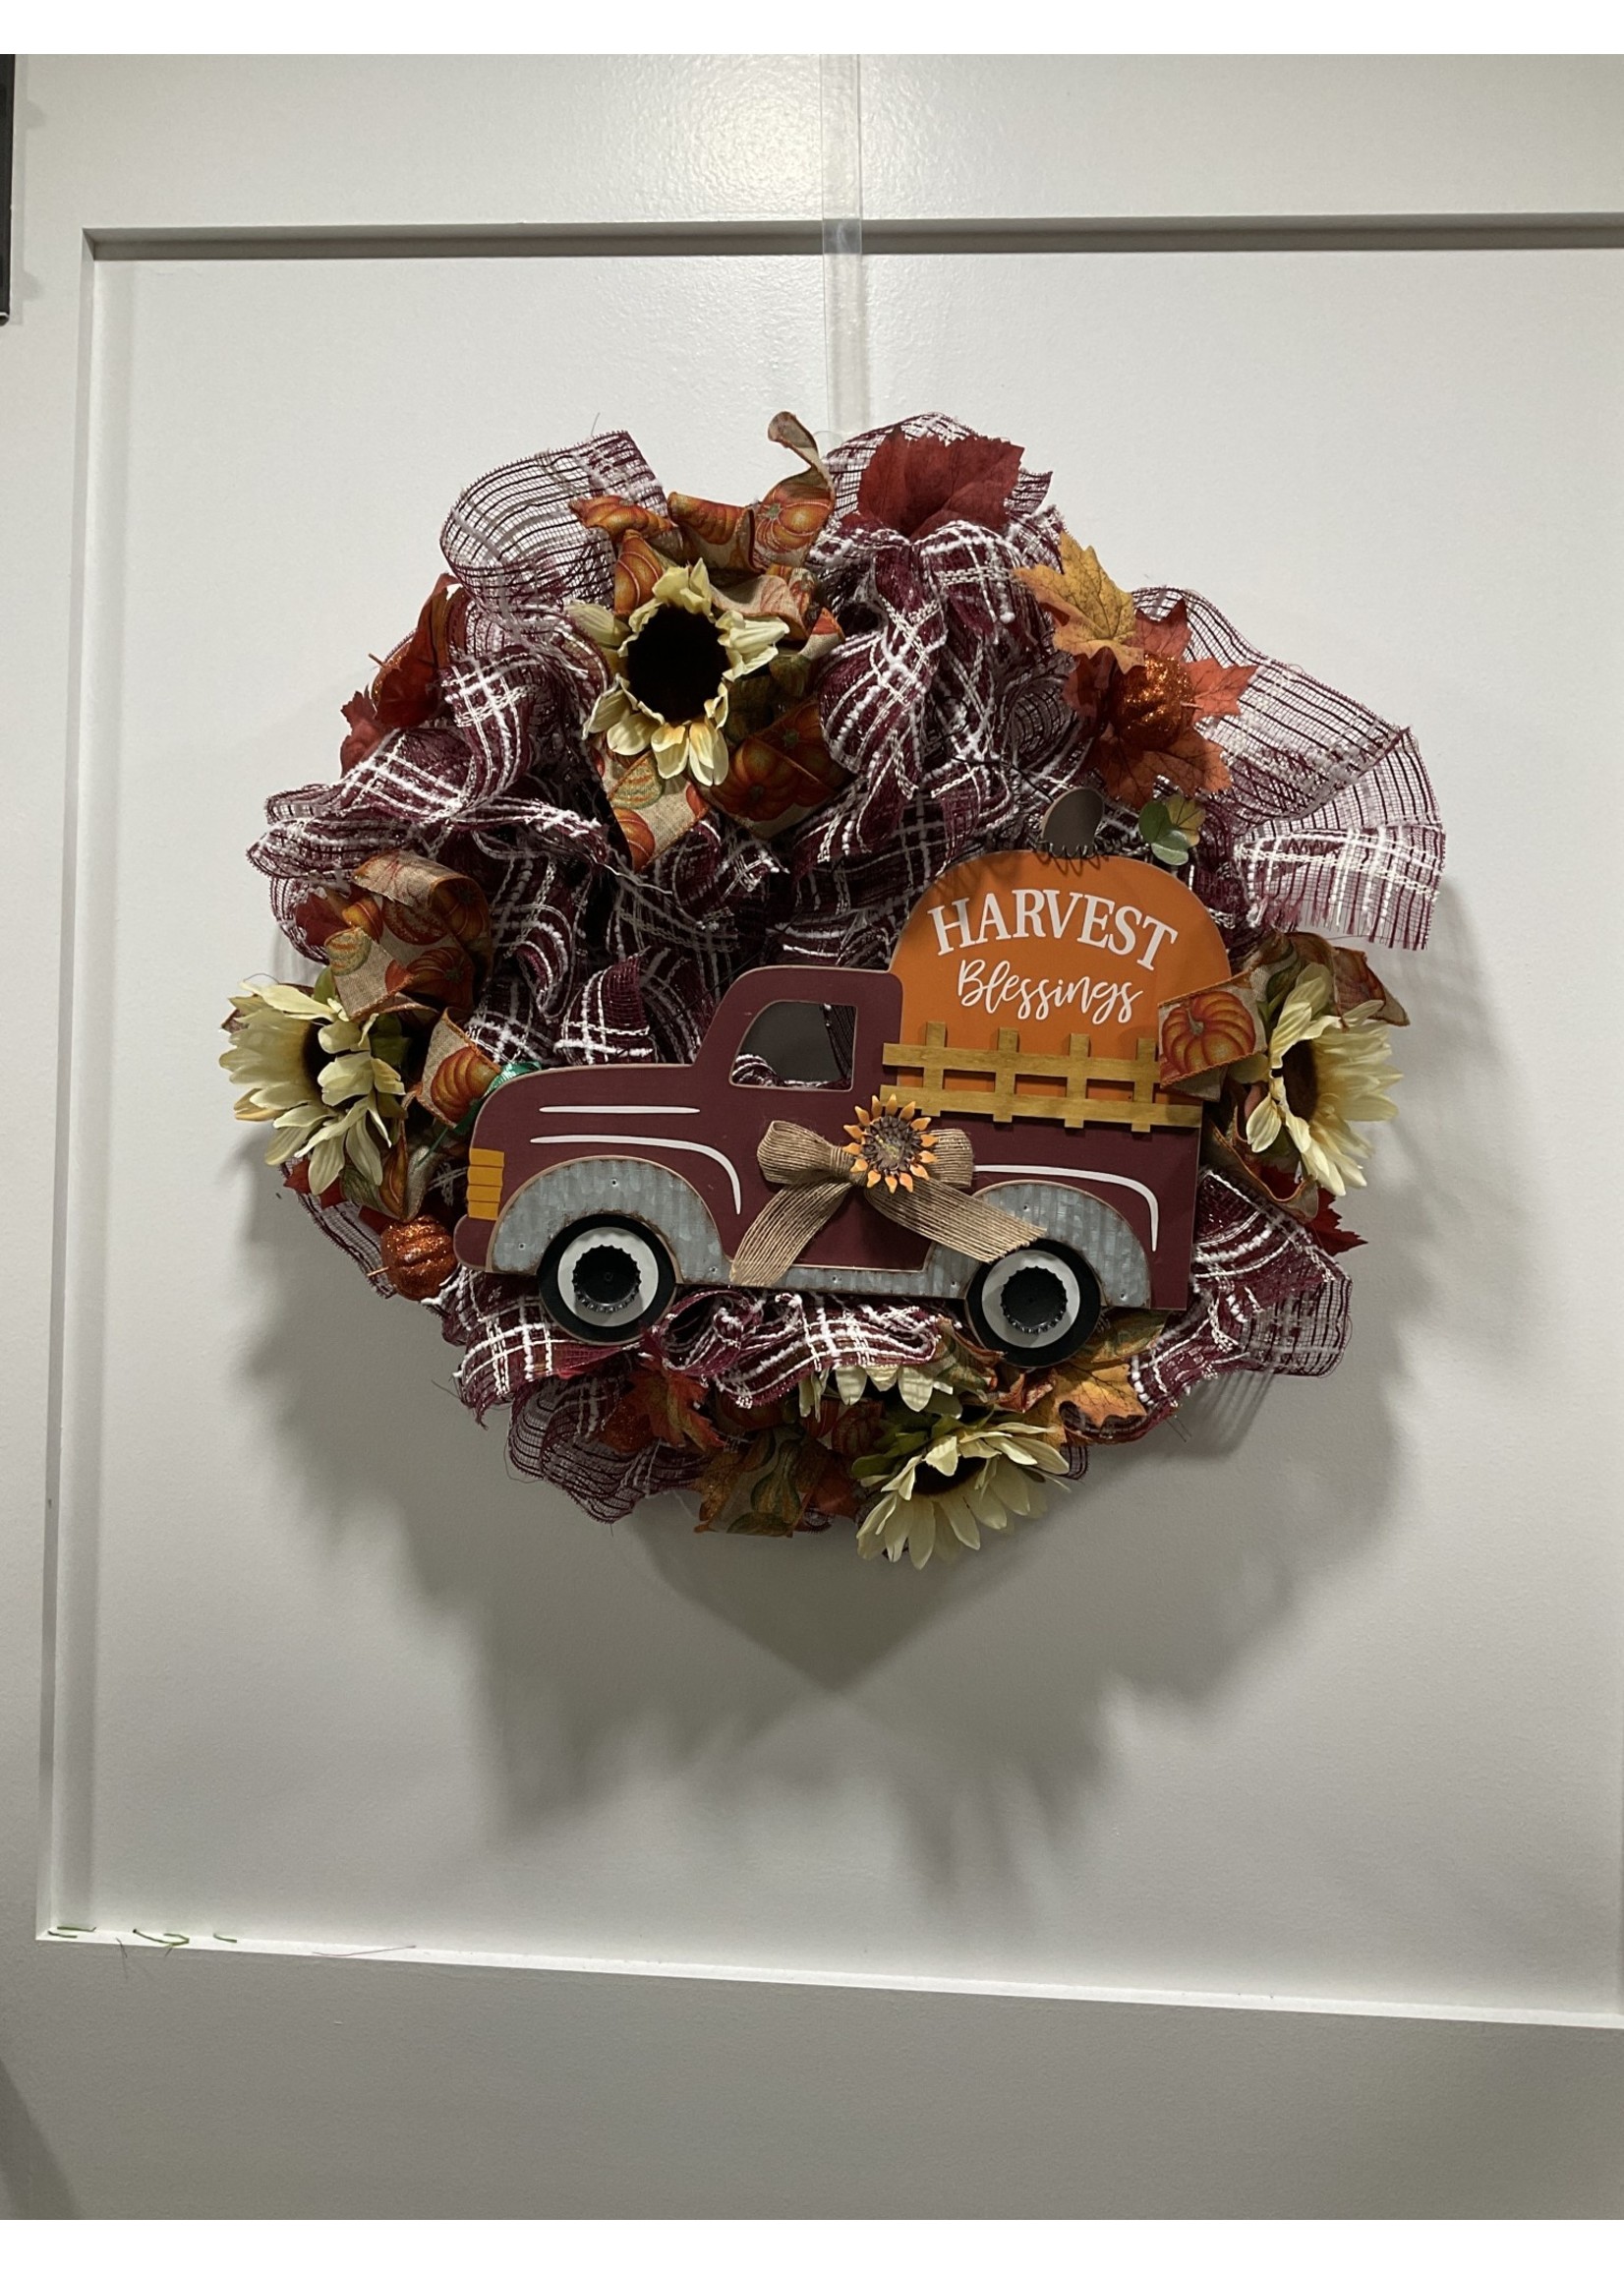 My New Favorite Thing 1656 Wreath Mesh 22 in-Maroon and White Red Truck "Harvest Blessings" w/White Flowers and Pumpkin Ribbon